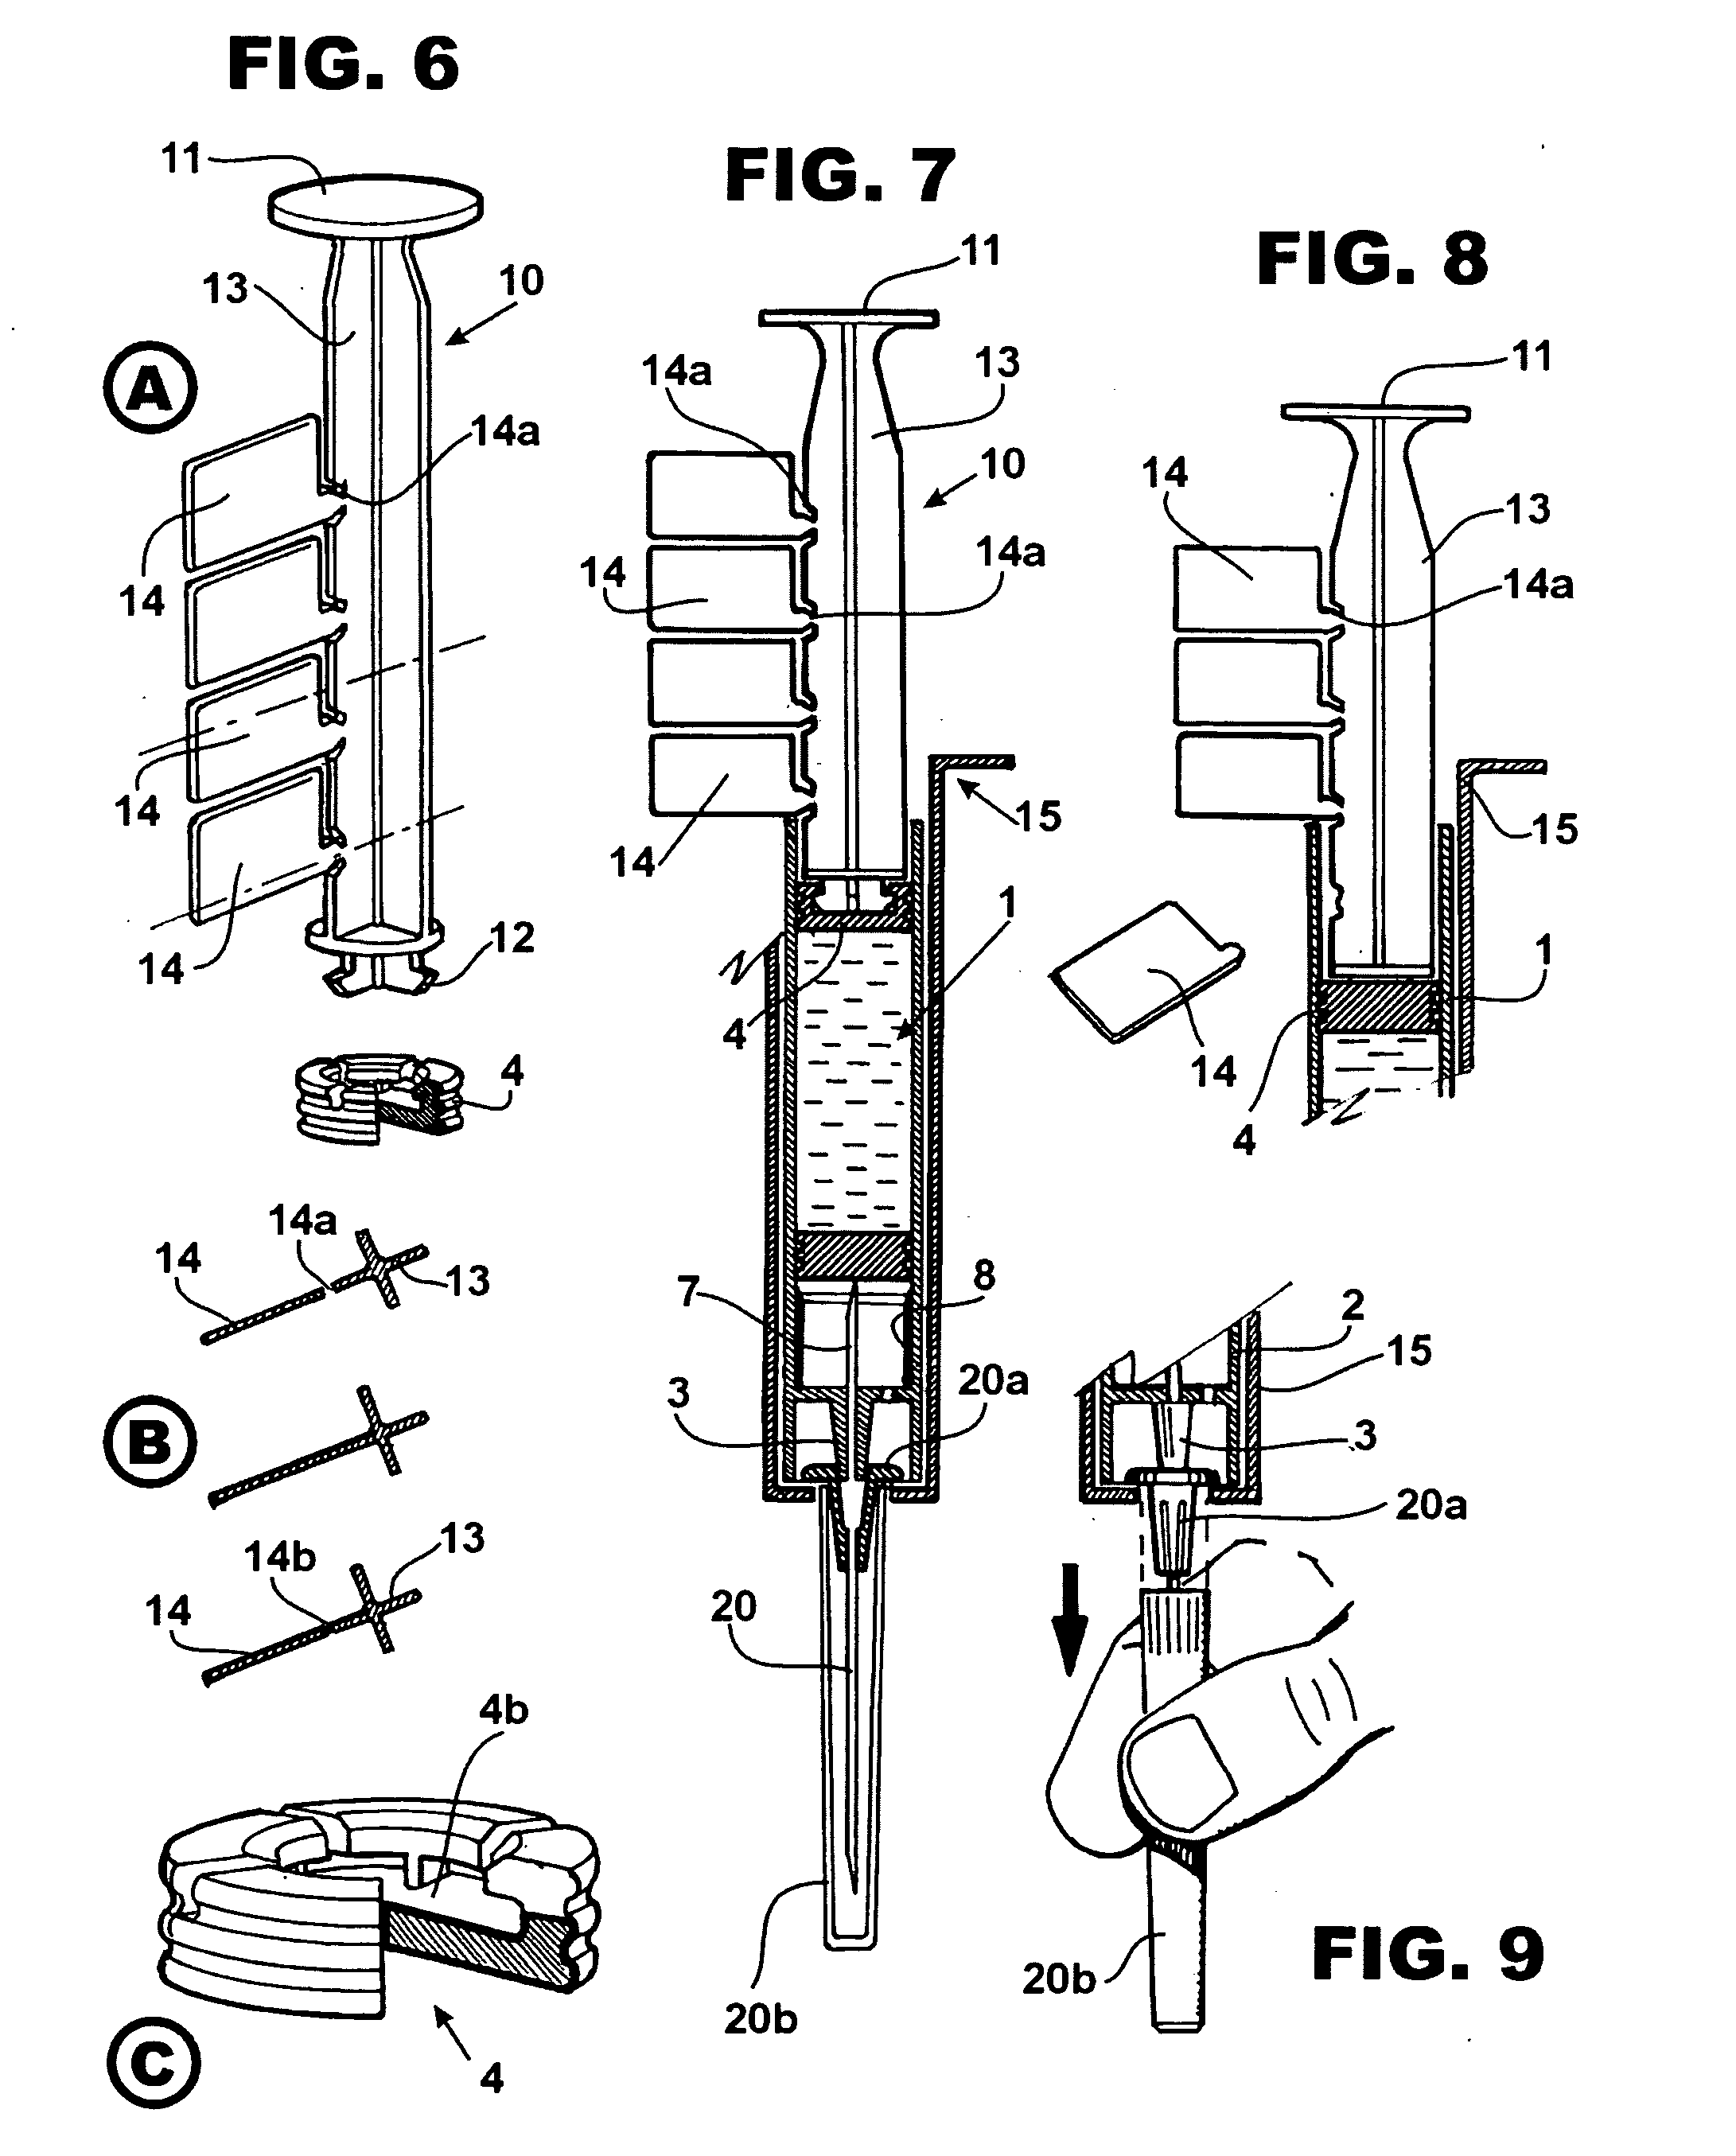 Unit to administer injectable medication manually or automatically